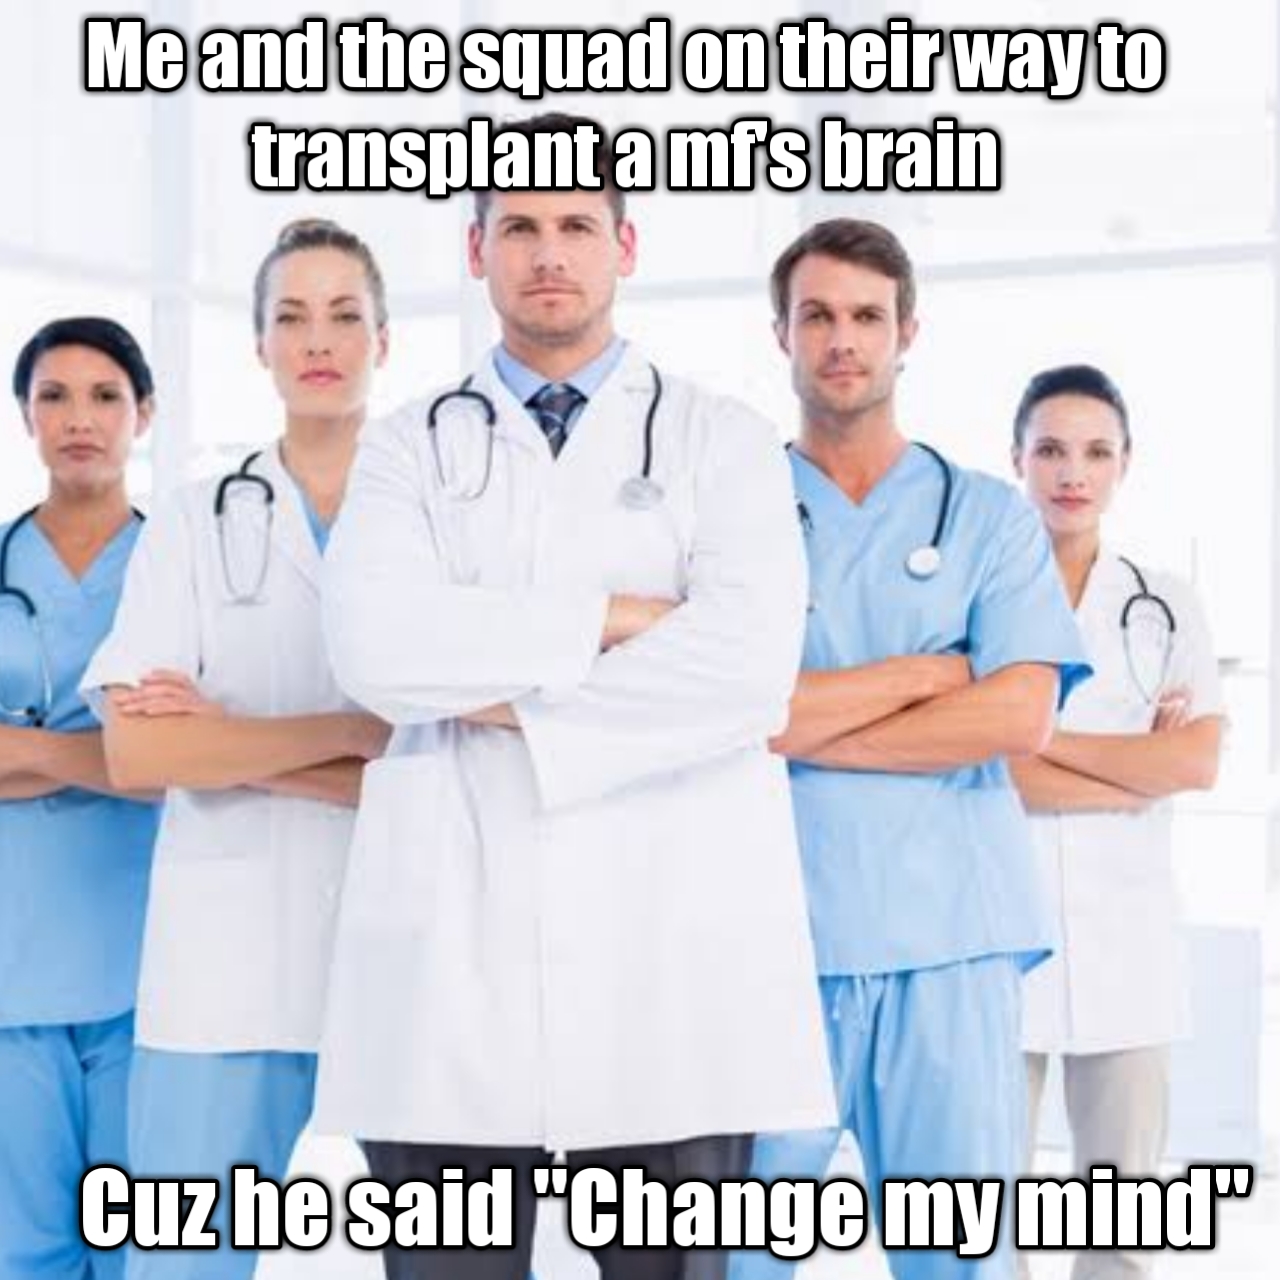 Me and the squad on their way to transplant amfs brain Cuzhe said "Change my mind